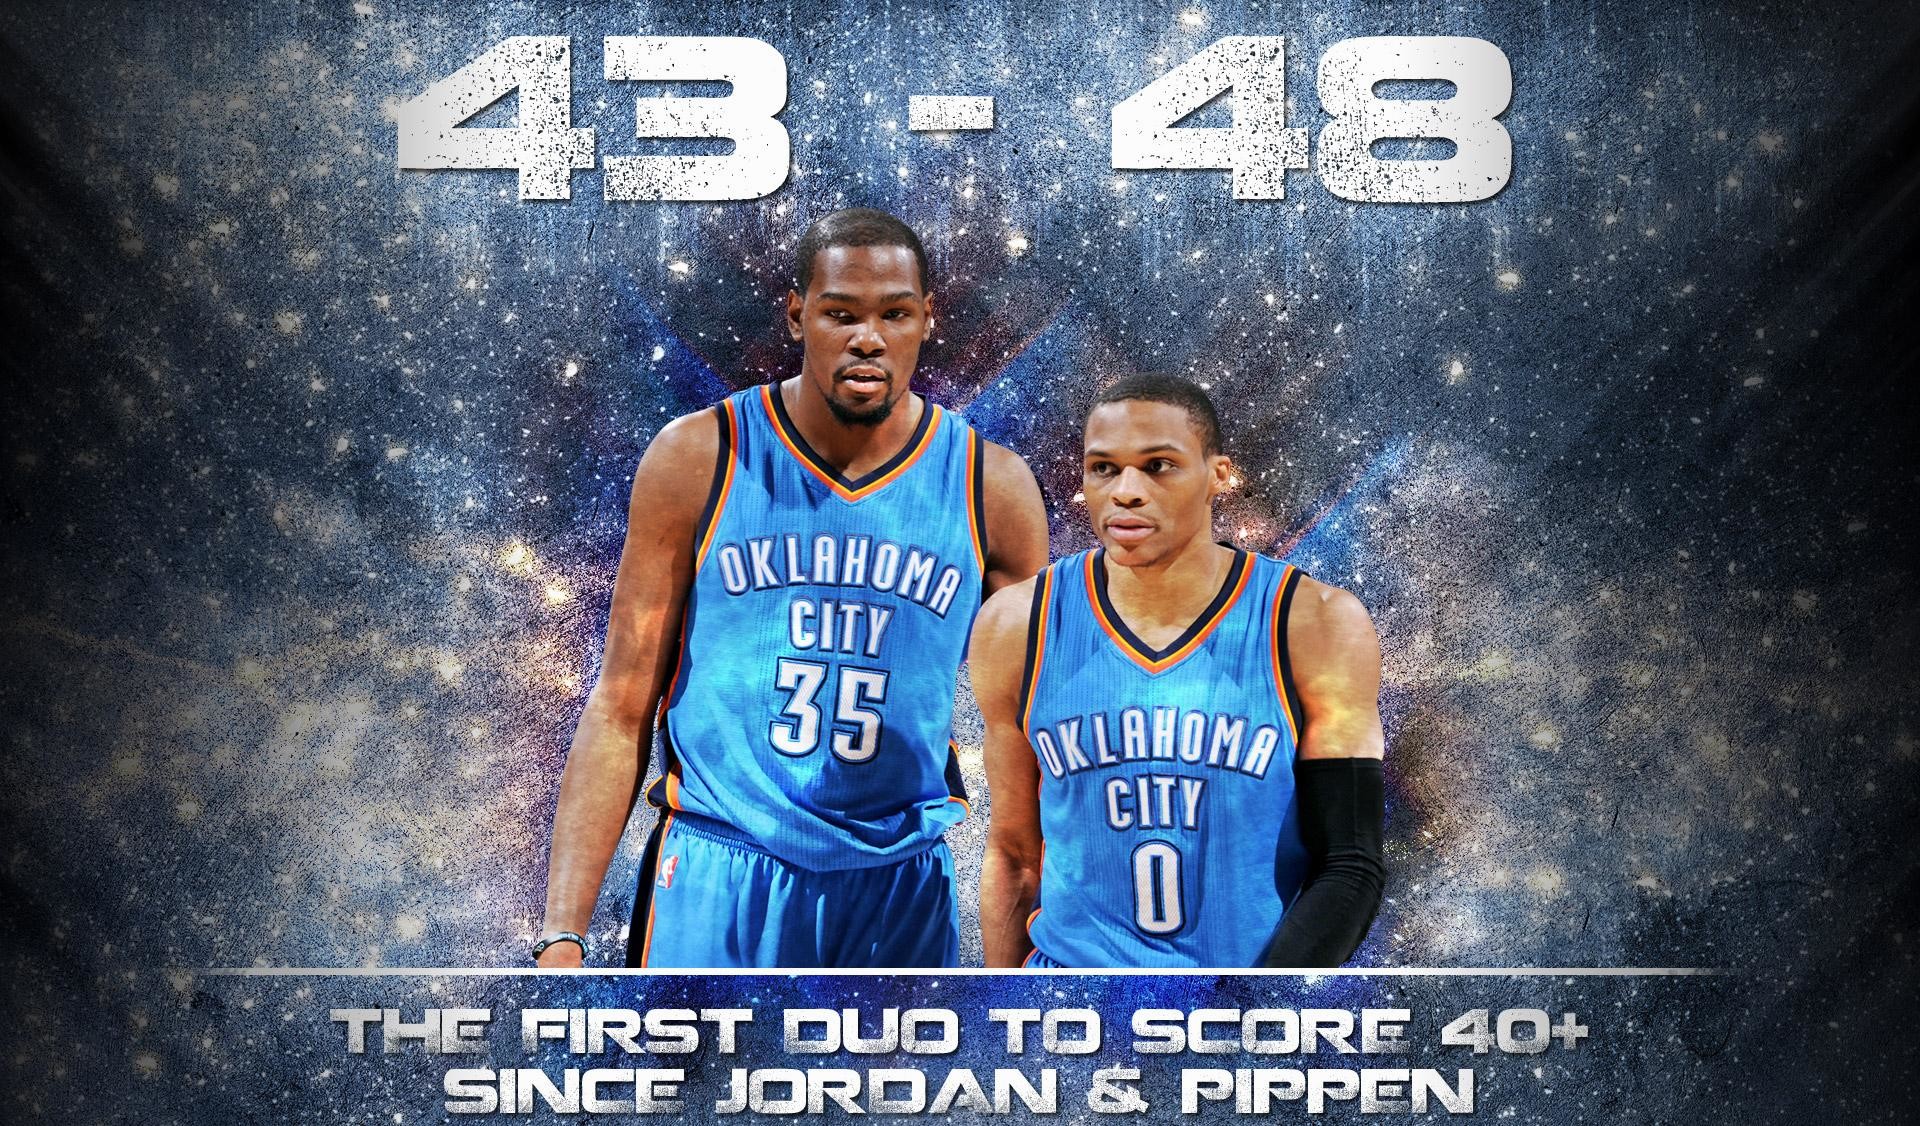 wallpaper.wiki-Backgrounds-Russell-Westbrook-Wallpaper-HD-PIC-